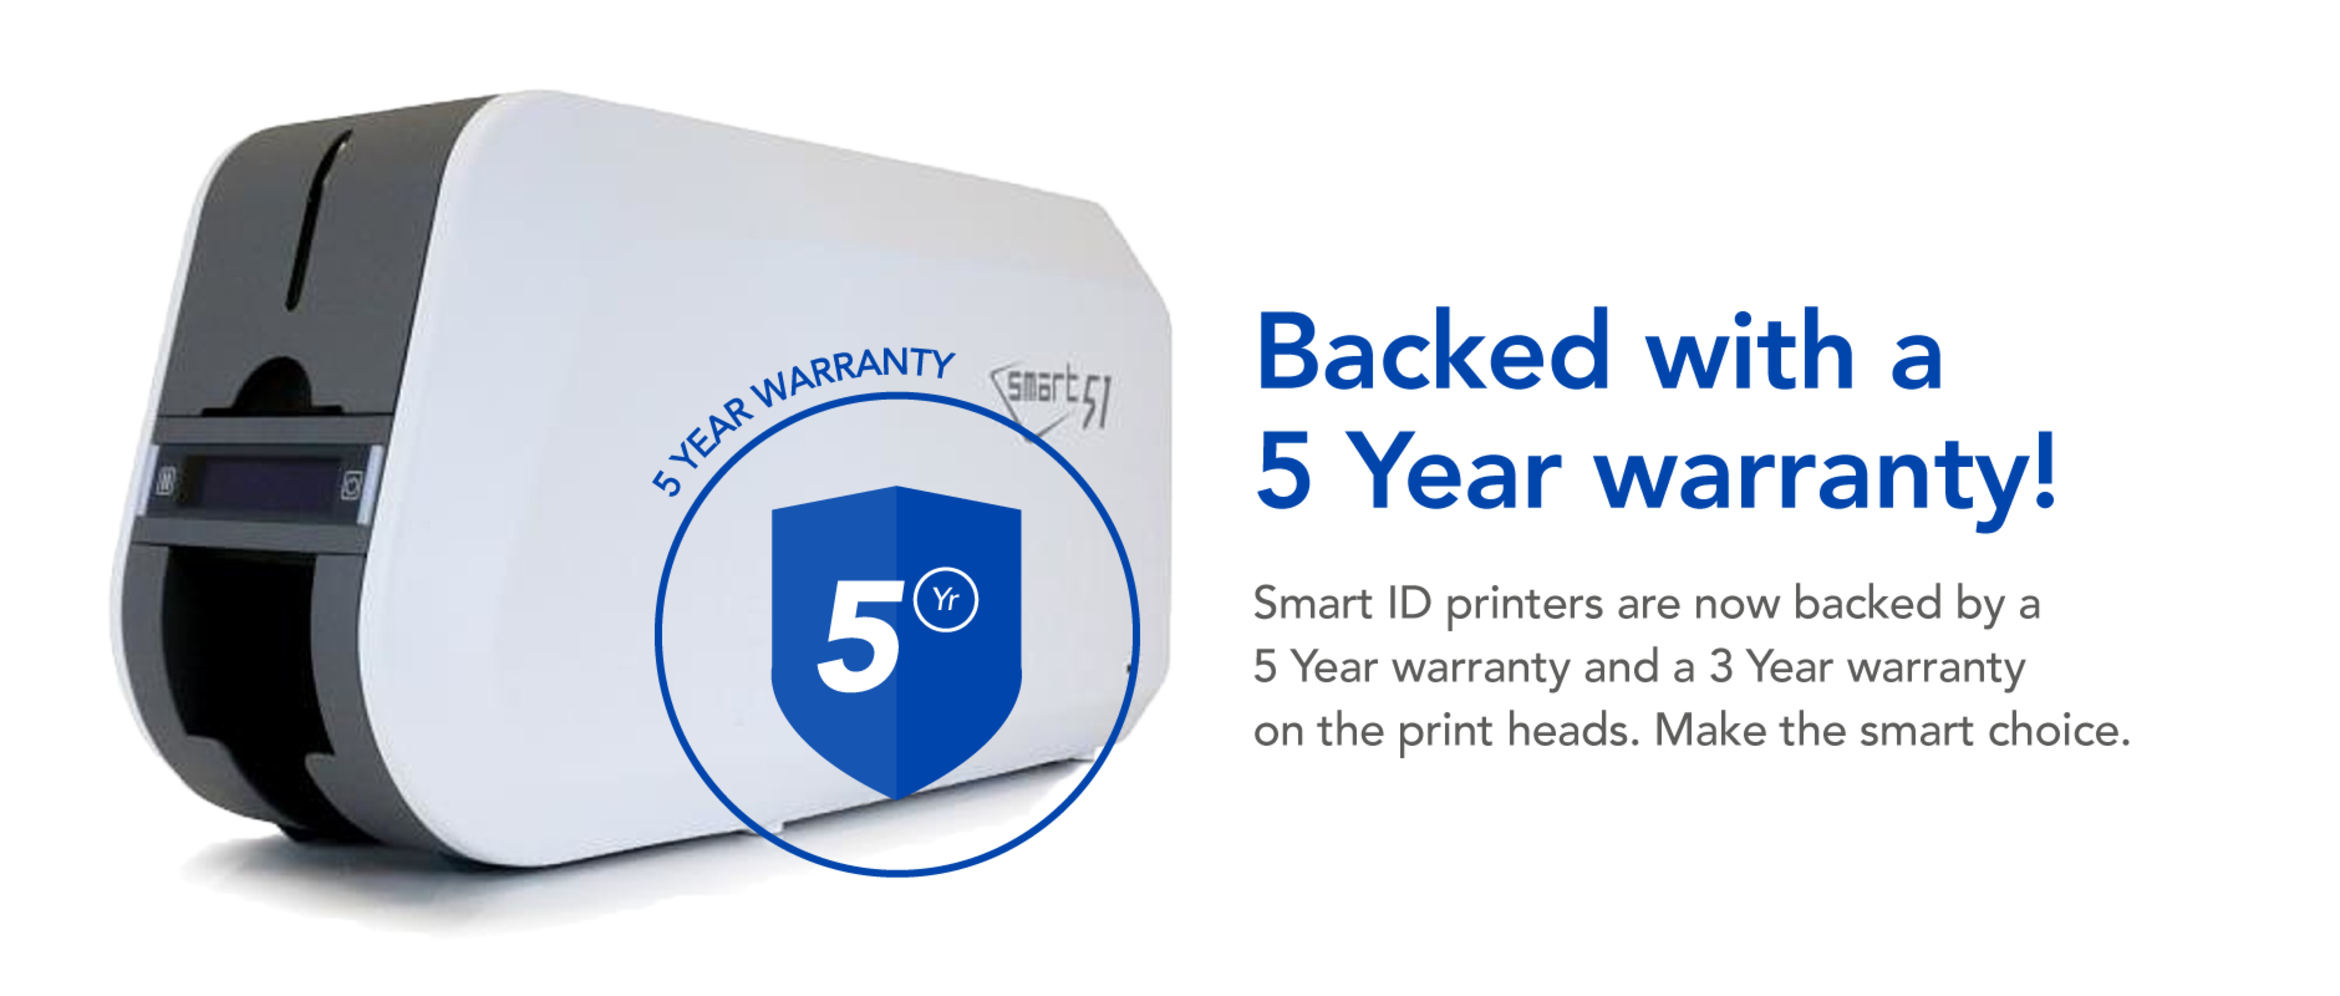 Backed with a 5 Year warranty!